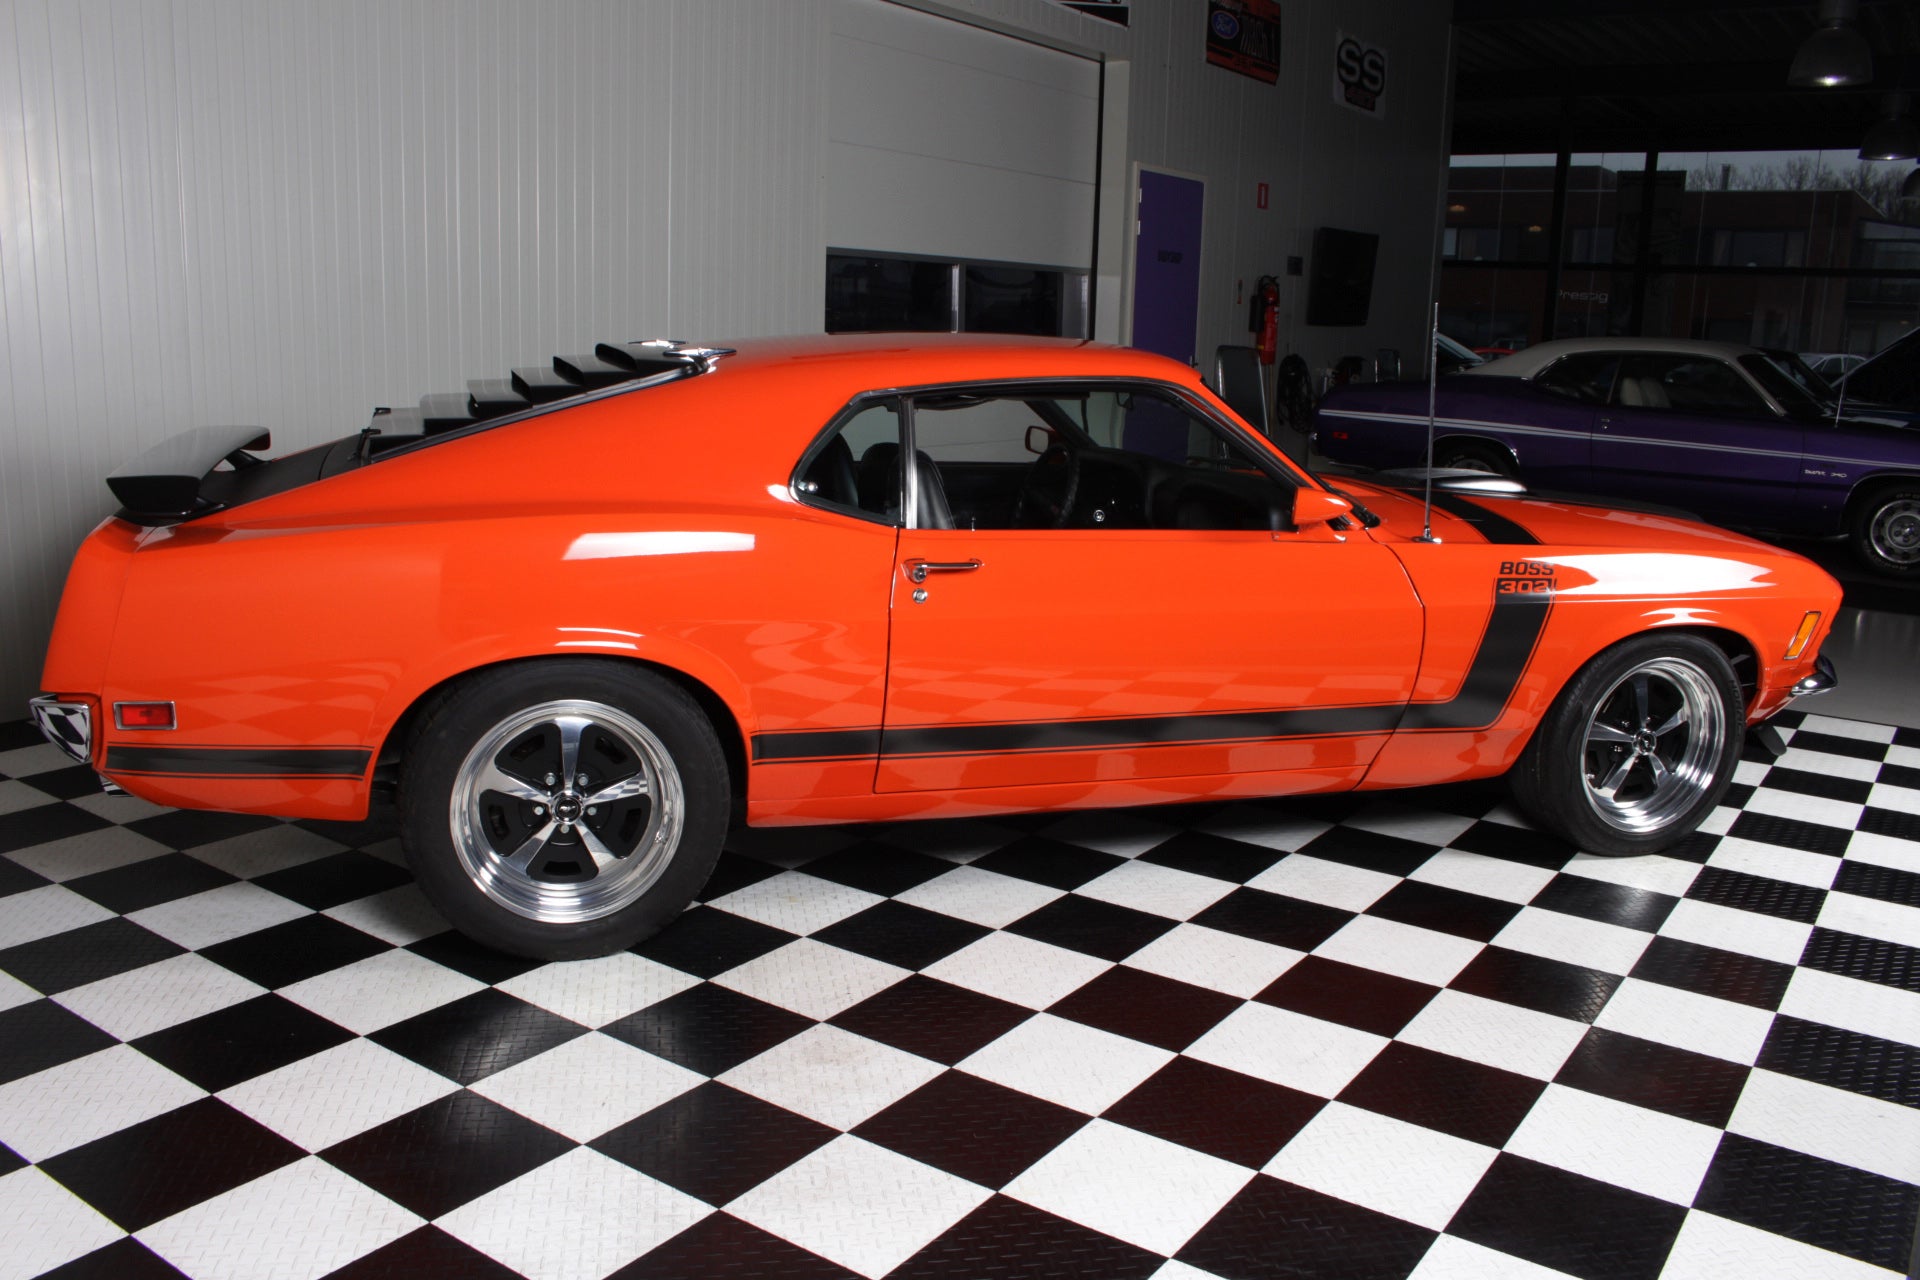 Ford Mustang Boss 302 5 speed Tremec Pro Touring